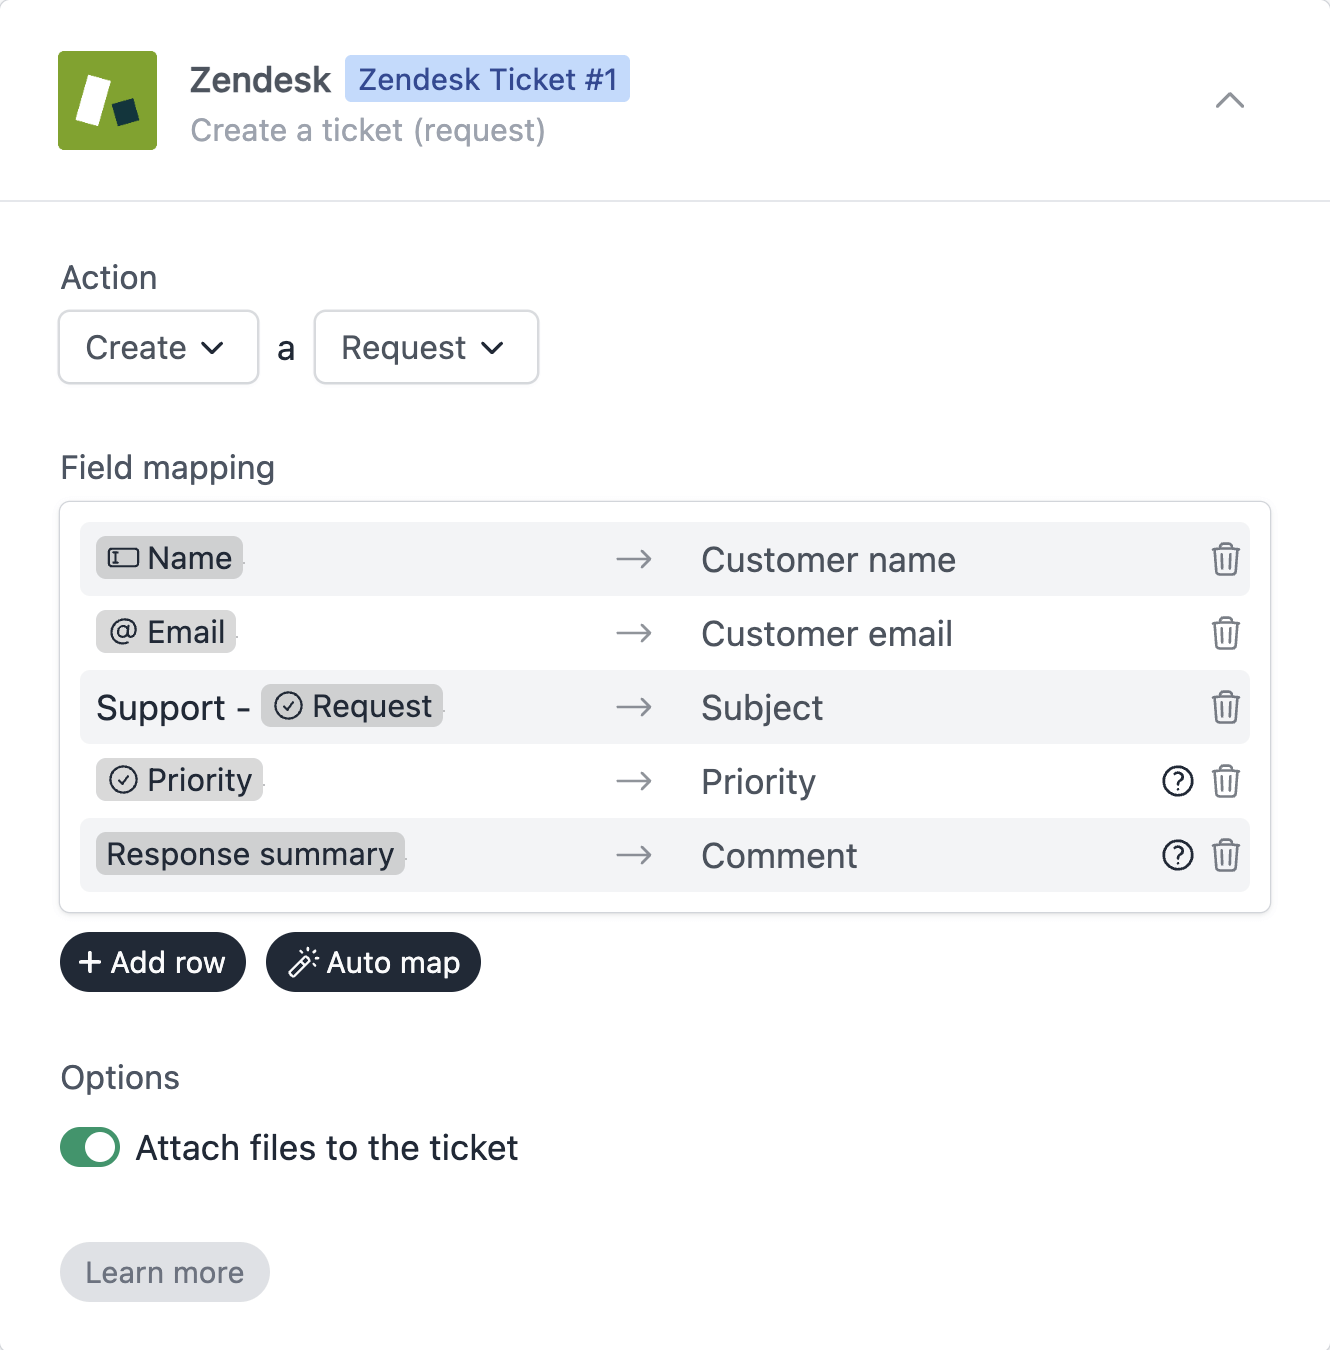 Configuration and field mapping between Formcrafts and Zendesk